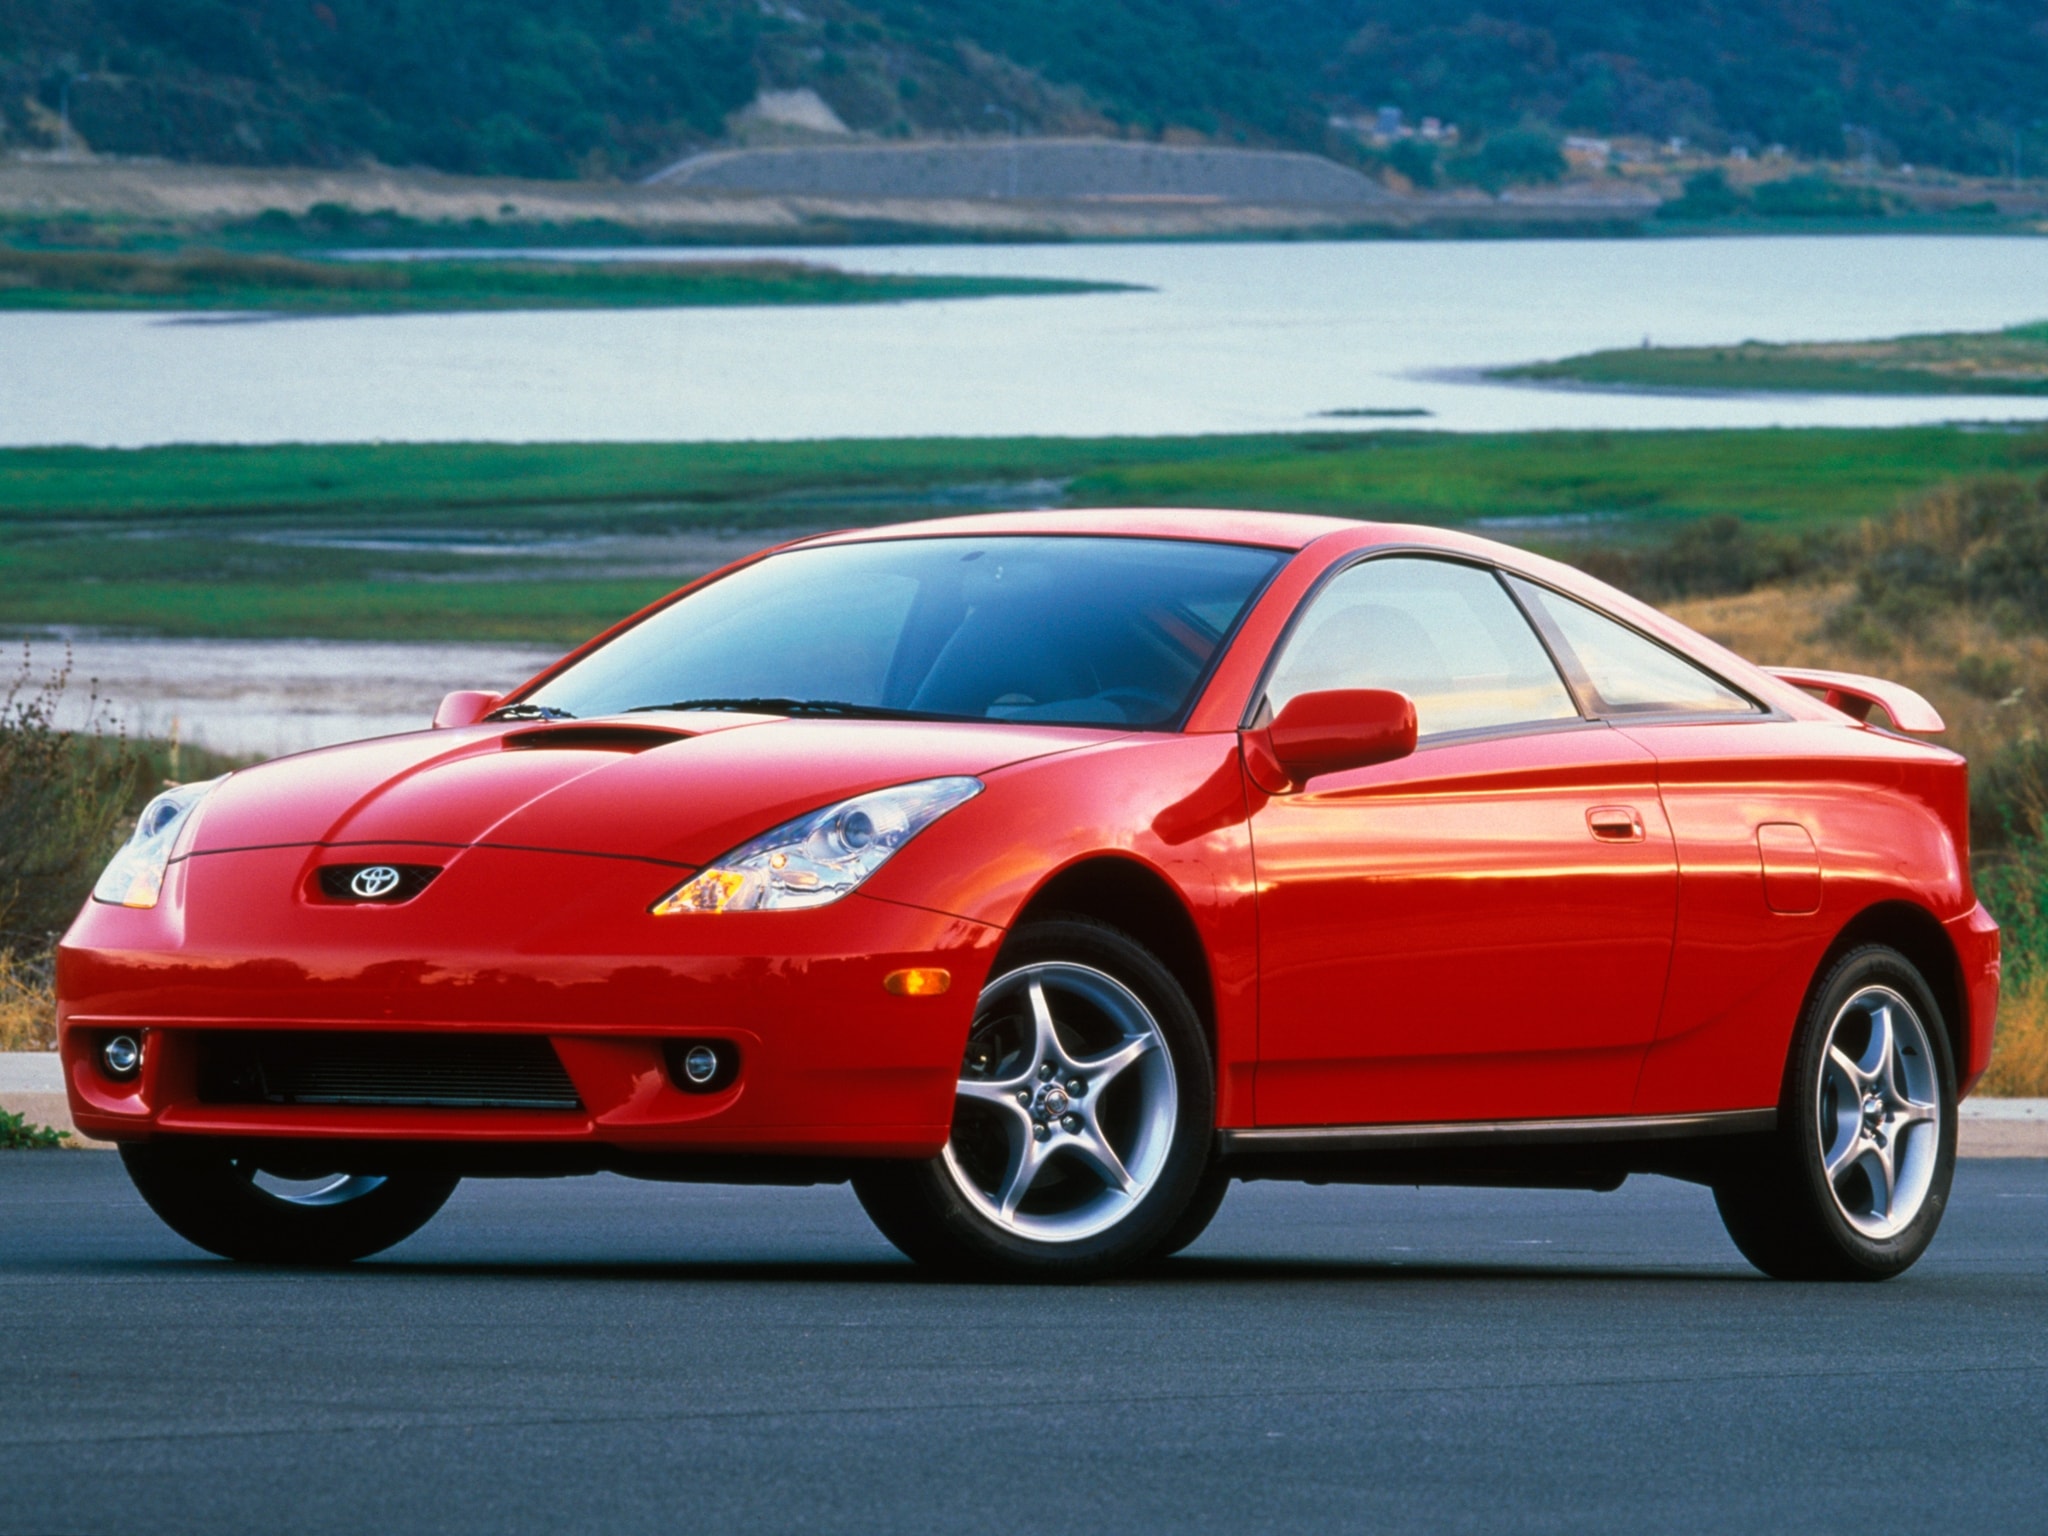 Toyota Celica Trademark Filing Sparks Rumors About New Sports Car ...